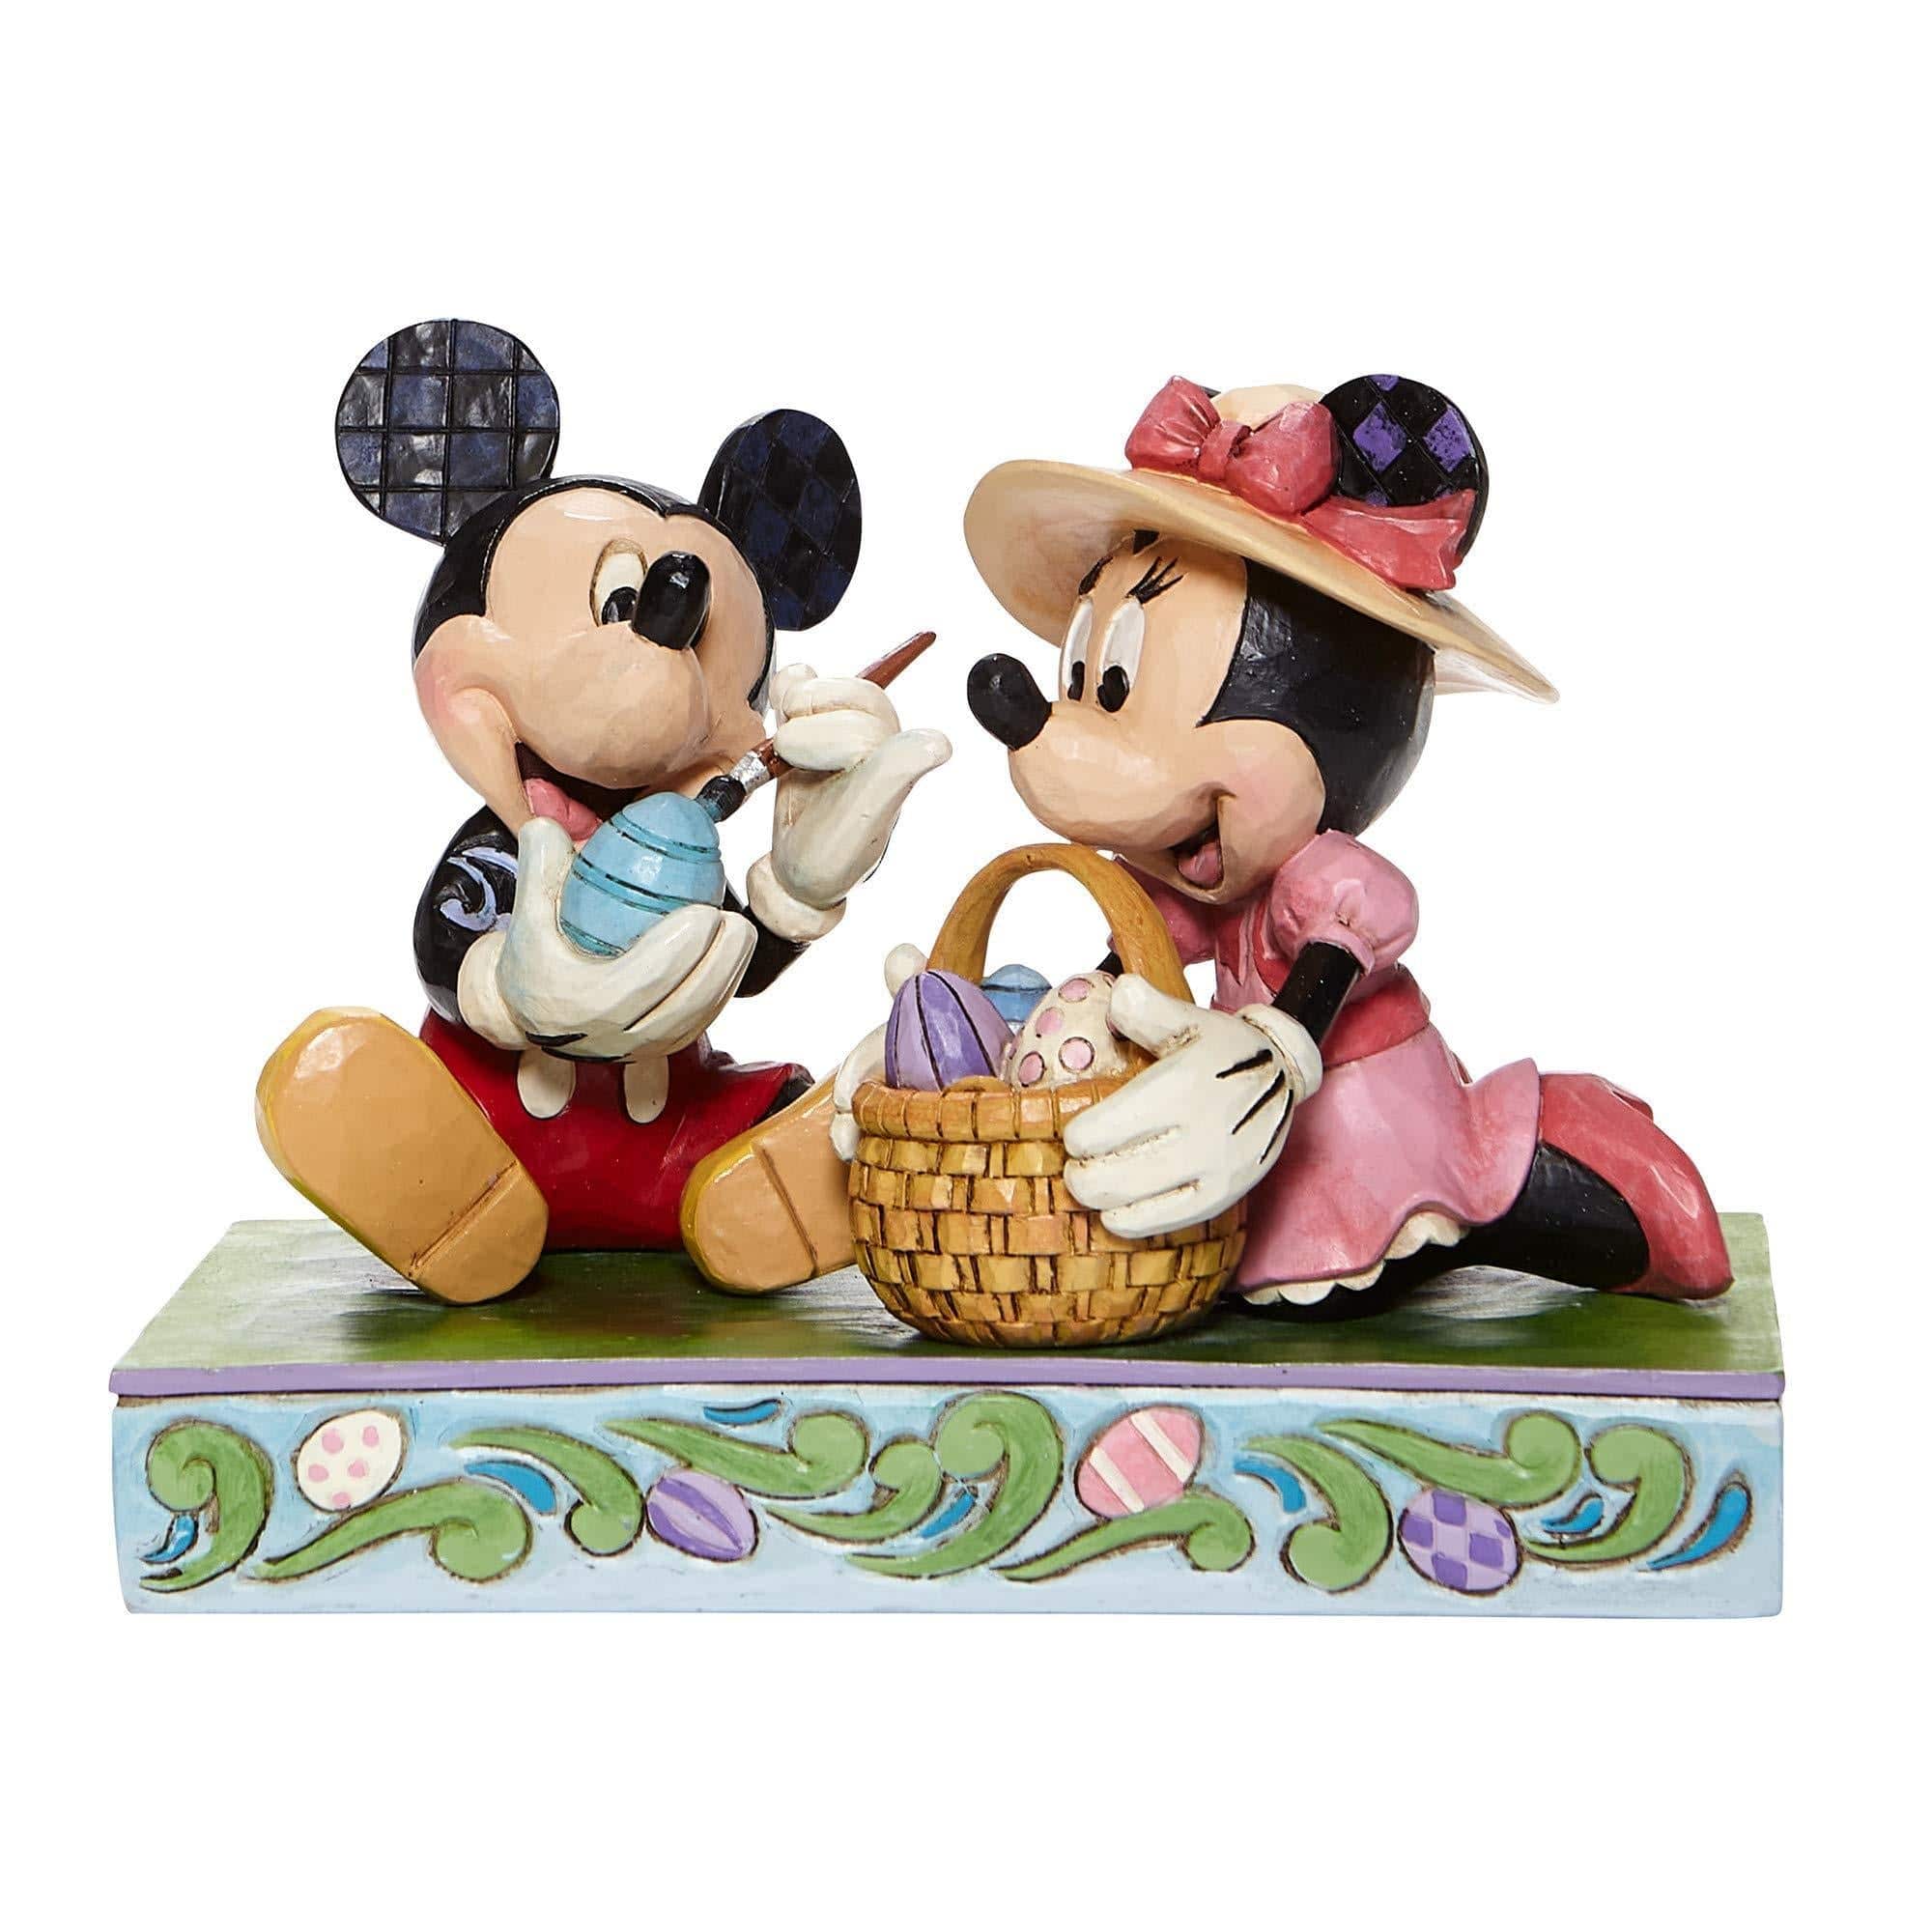 Enesco Disney Ornament Disney Traditions Figurine - Easter Artistry - Mickey and Minnie Easter Figurine